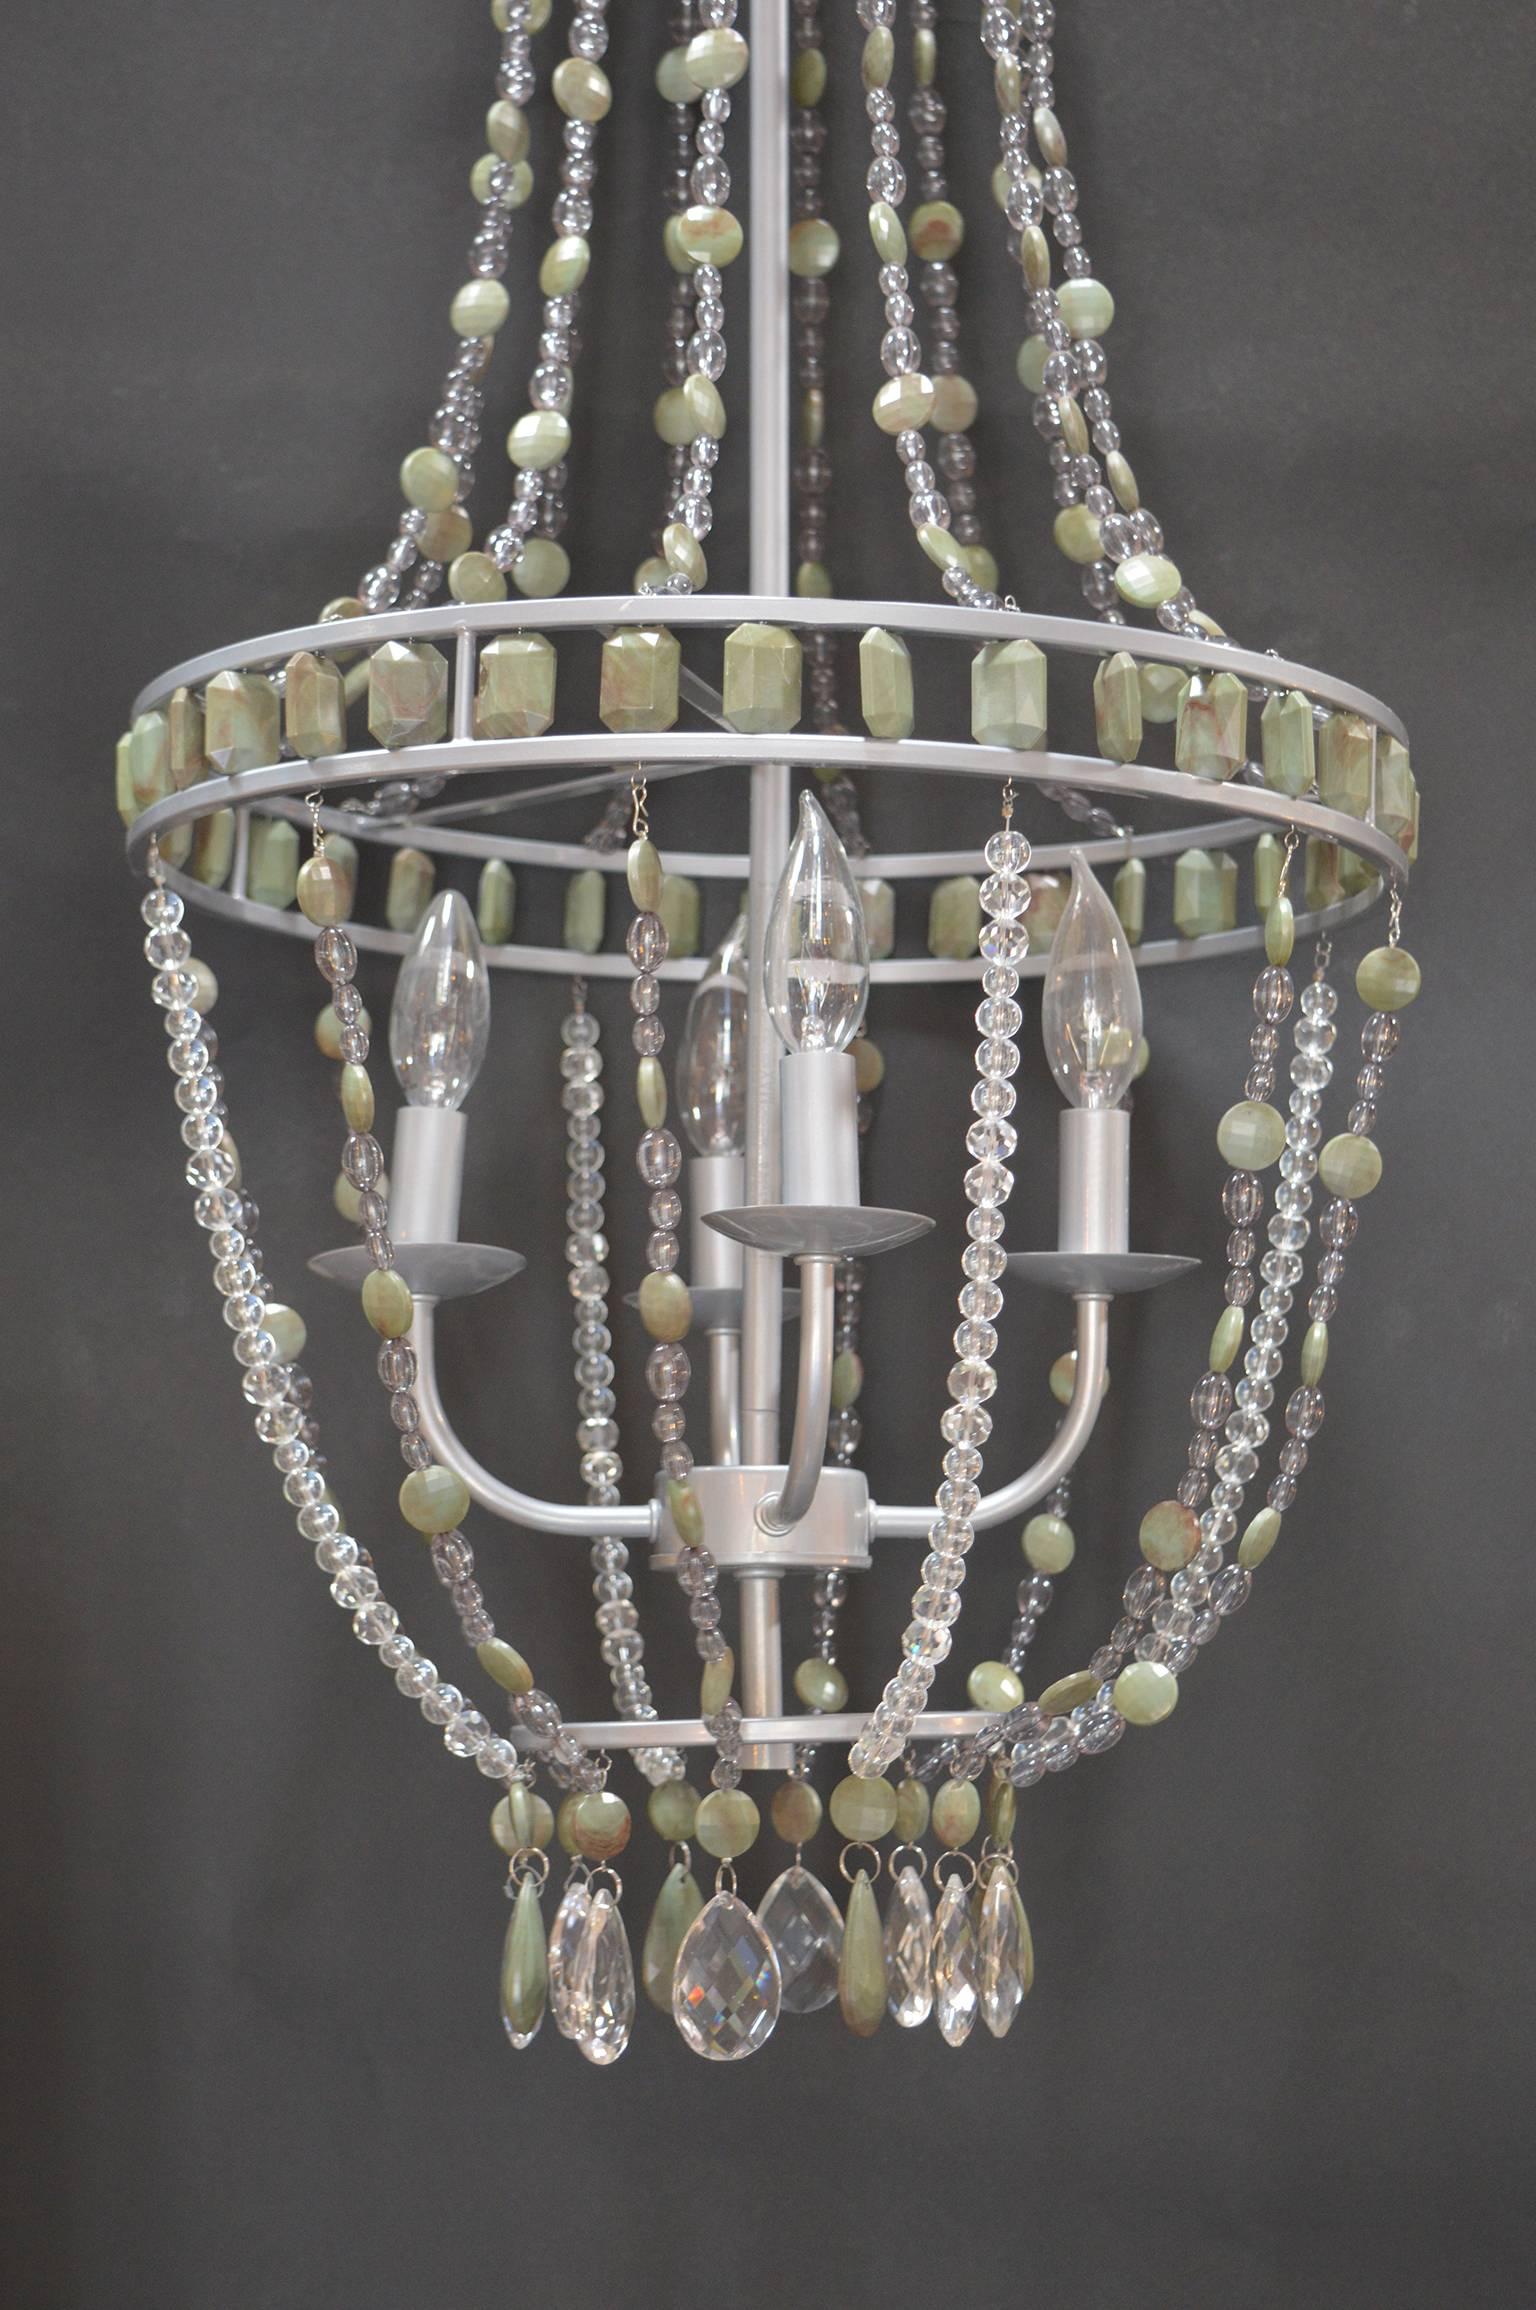 Hollywood Regency Chandelier In Excellent Condition For Sale In Los Angeles, CA